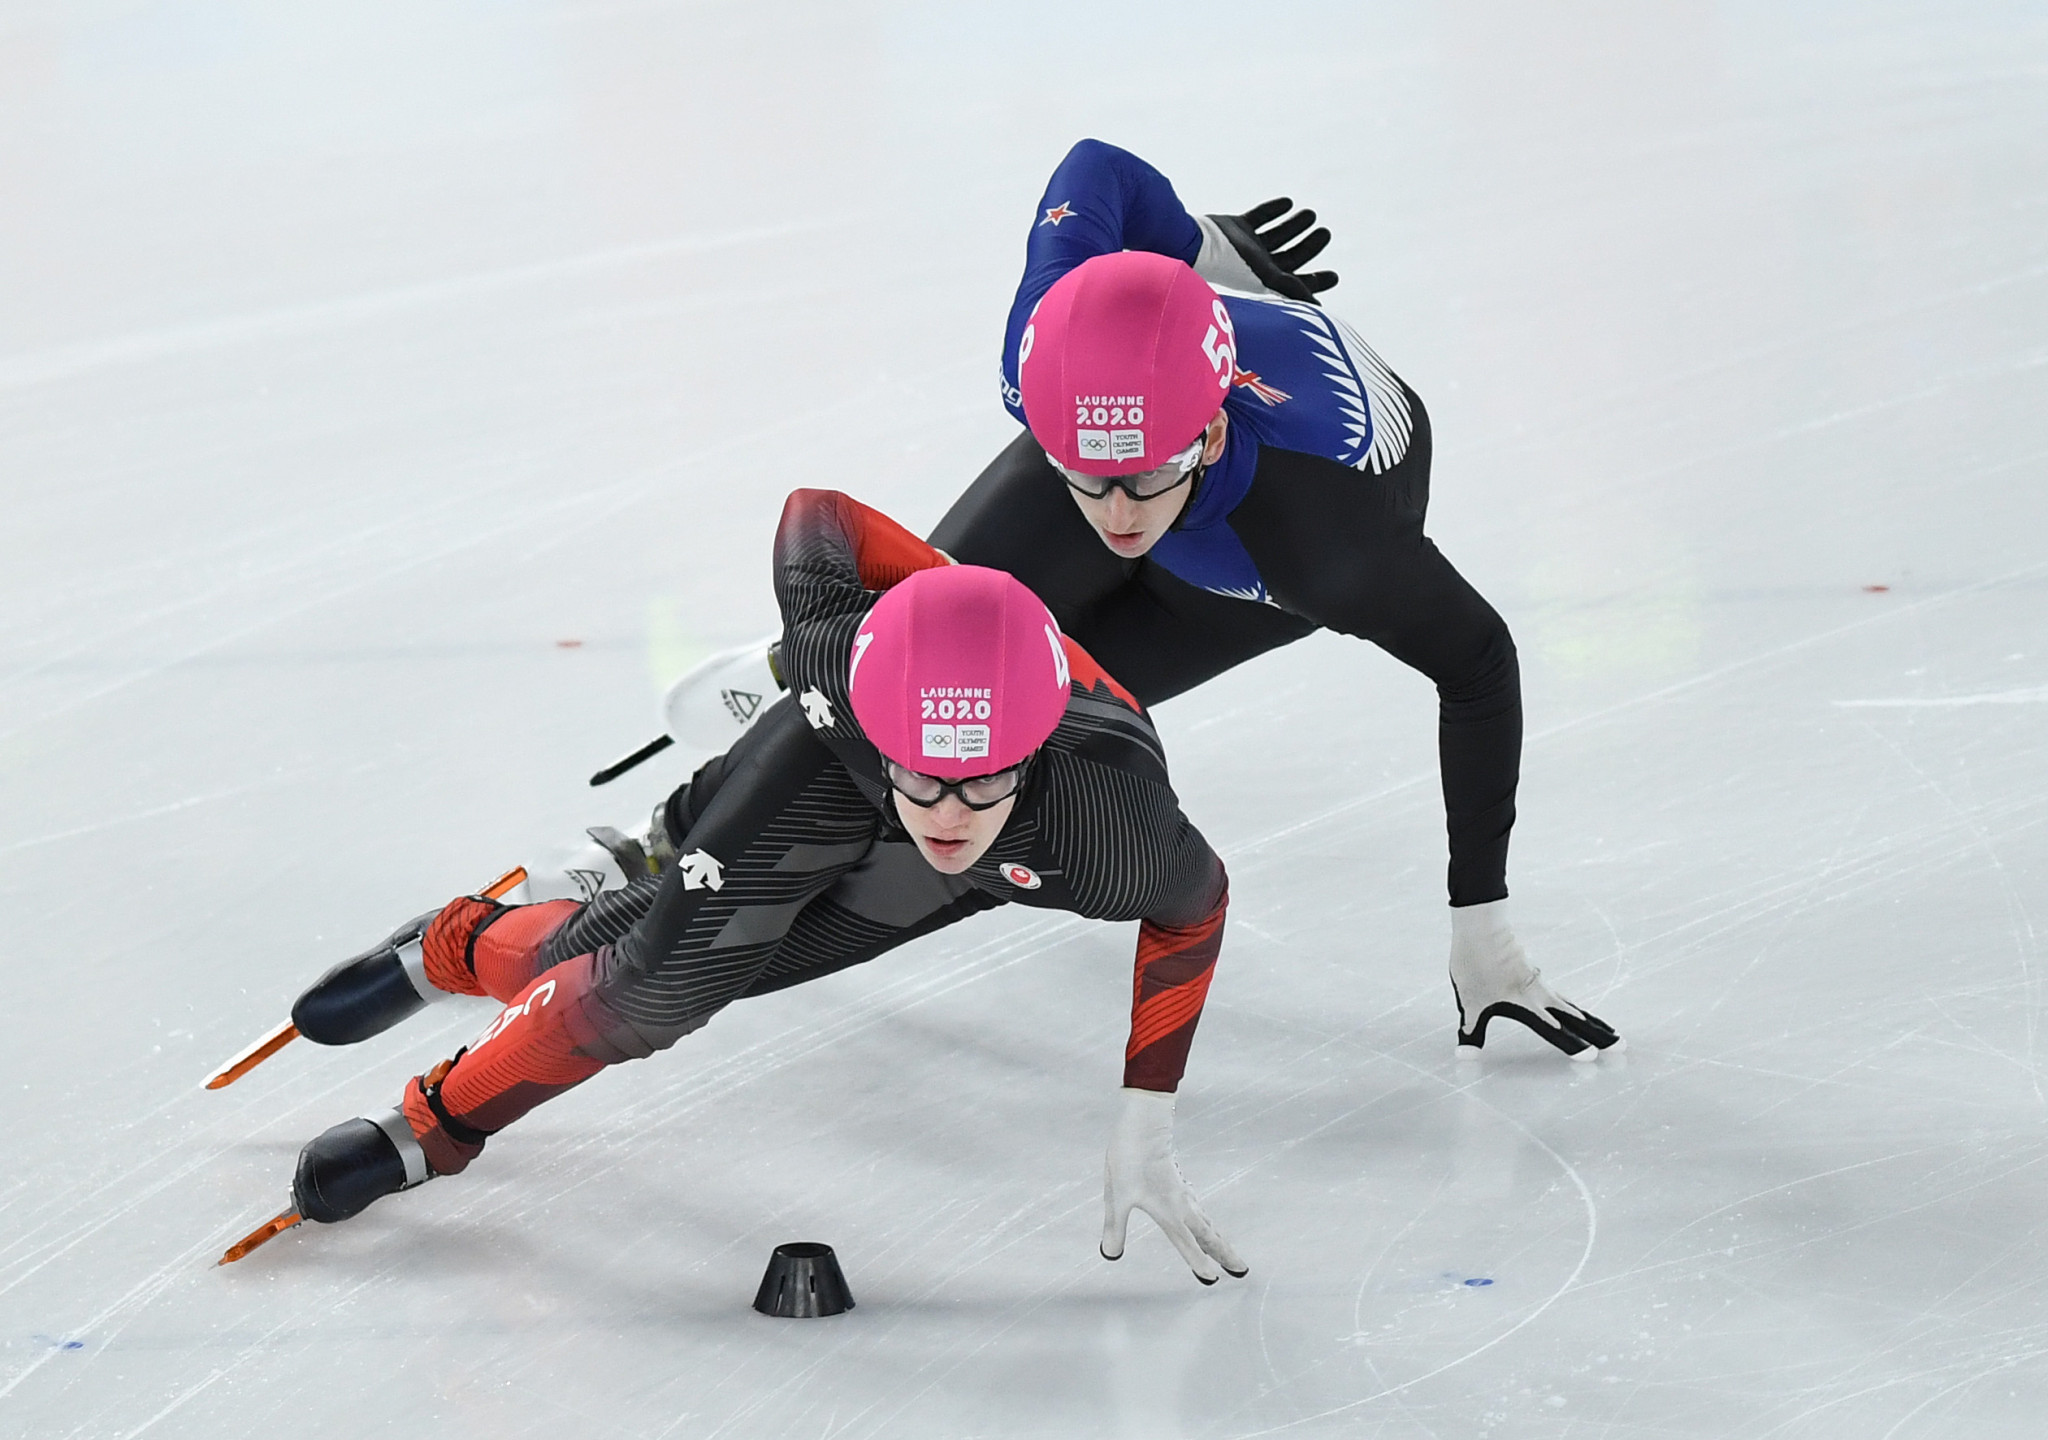 Young stars qualify for World Junior Short Track Speed Skating semi-finals